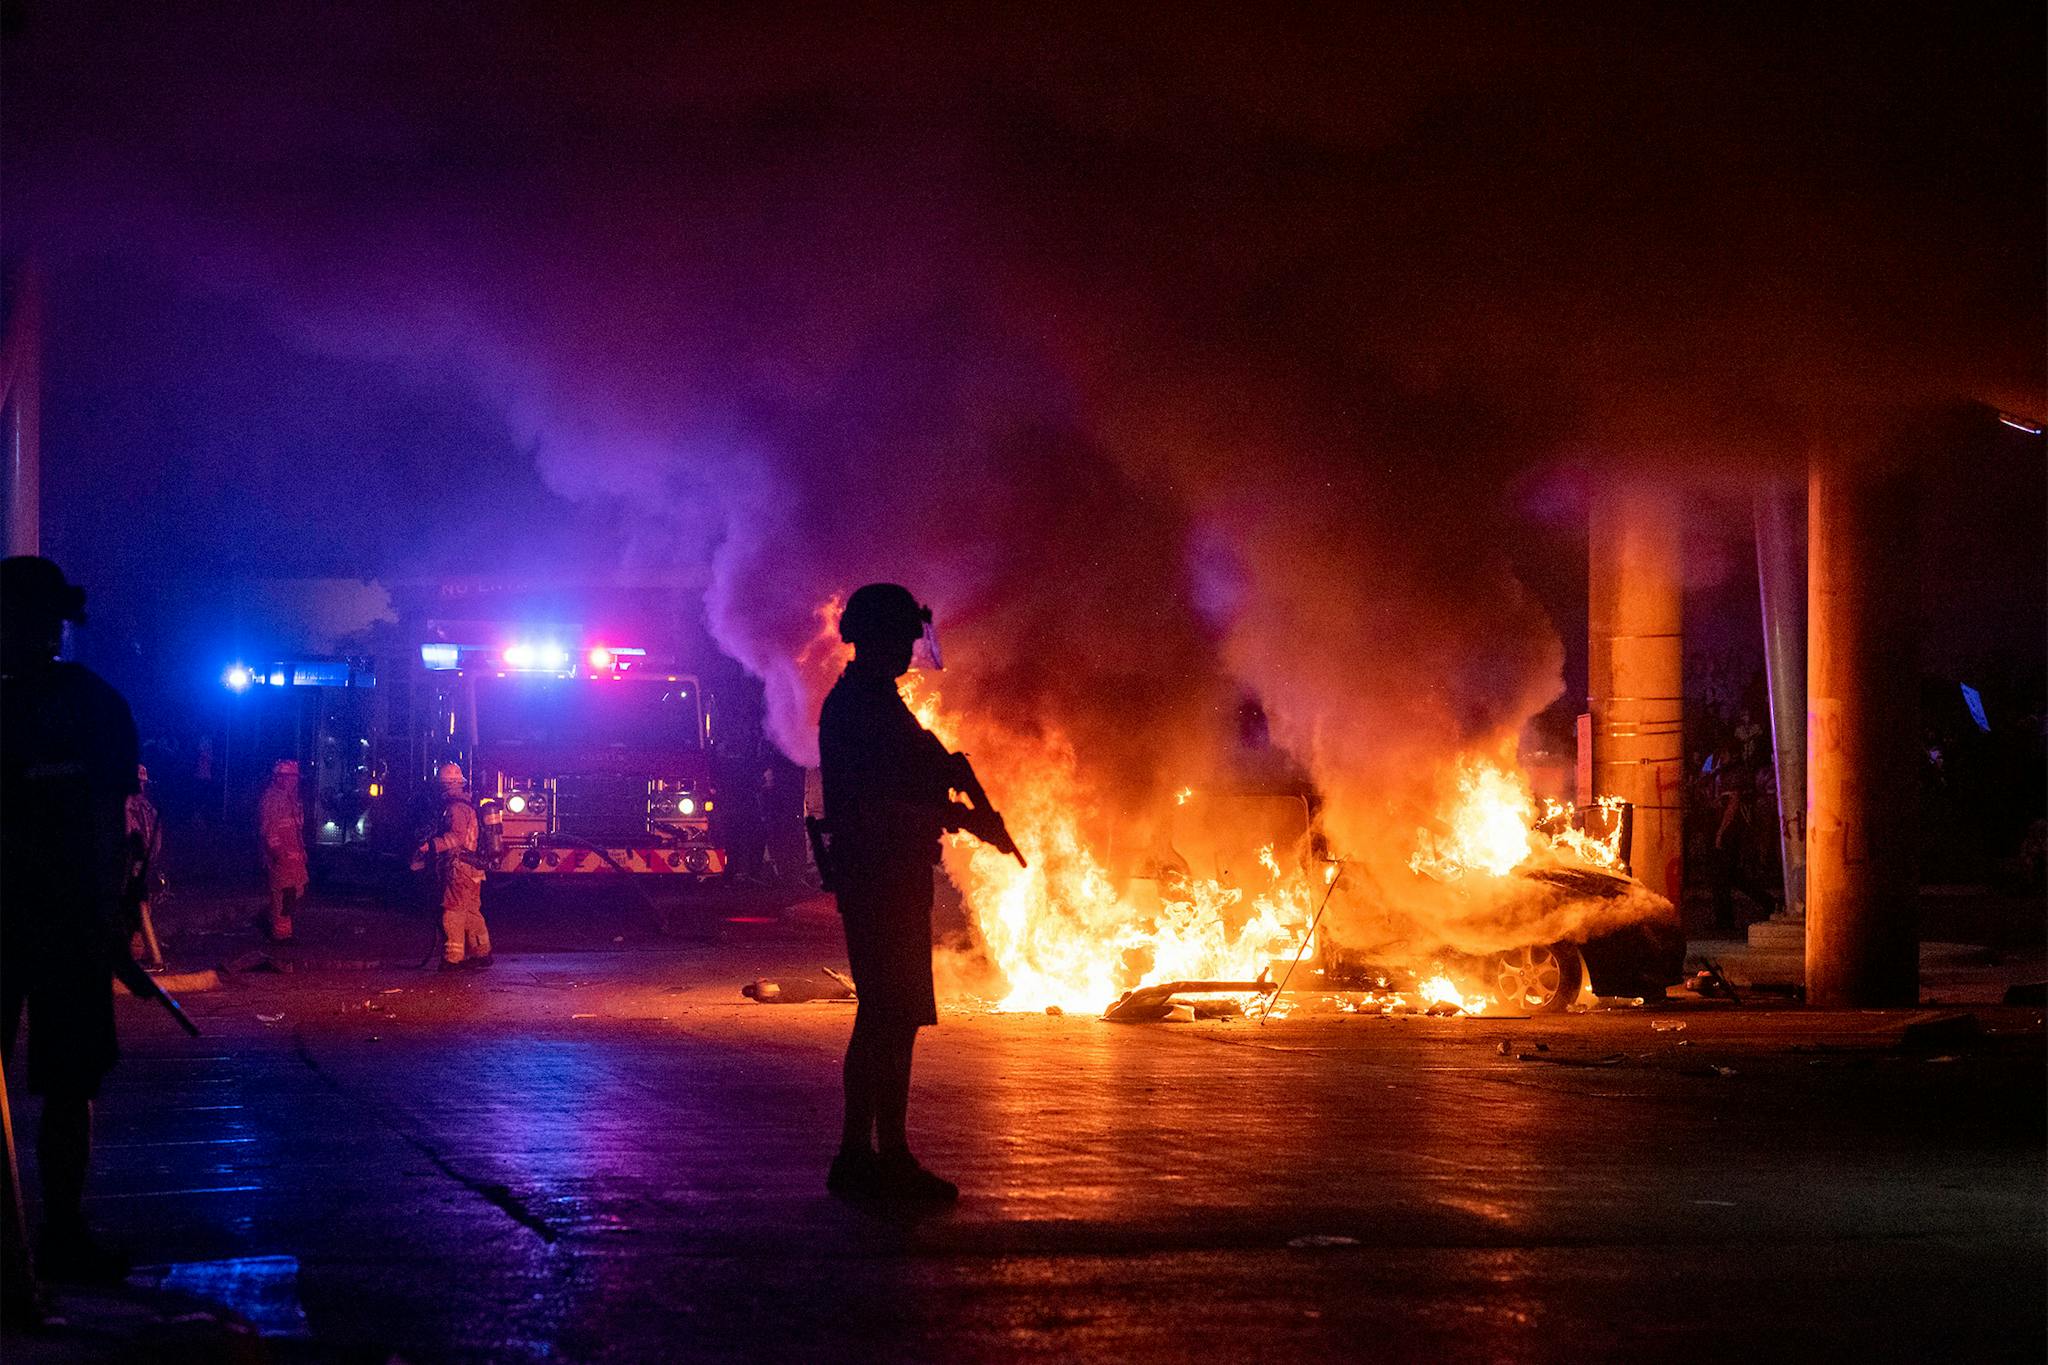 Officer protects the perimeter of a burning car under I-35 so firefighters can put it out during protests in Austin on May 30, 2020.